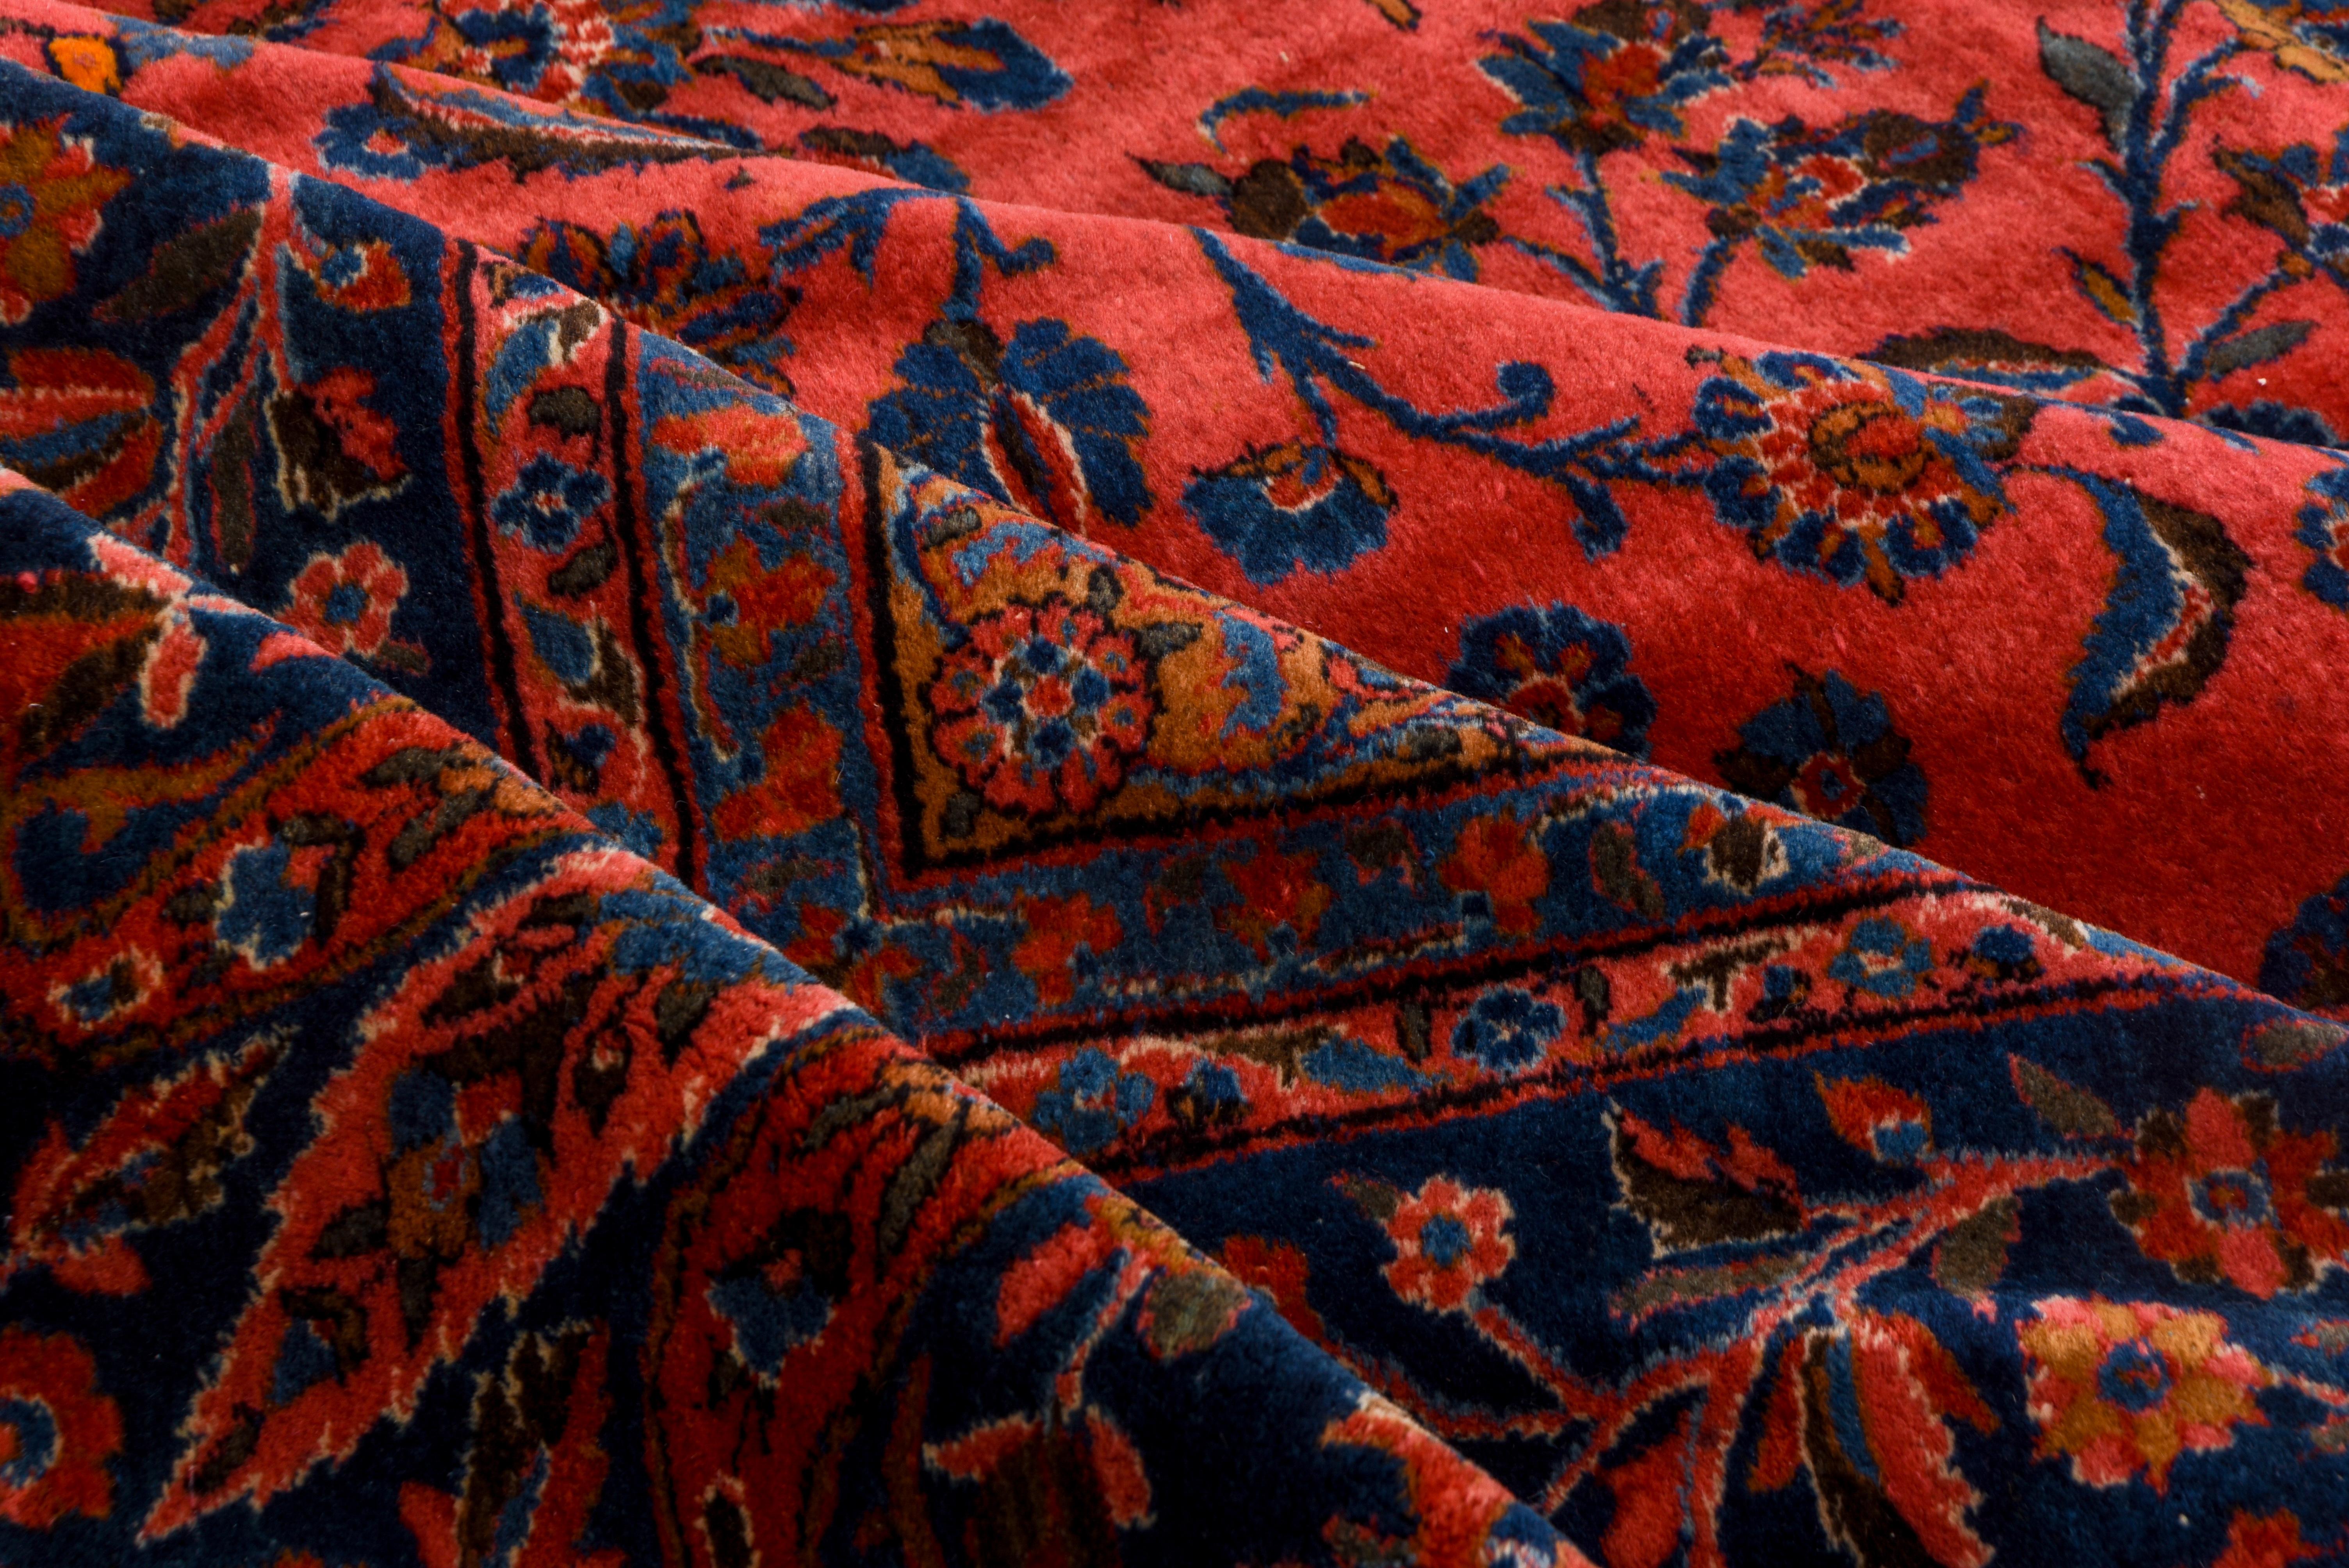 The scarlet field of luxurious English spun wool features a floating floral spray pattern derived from contemporaneous 